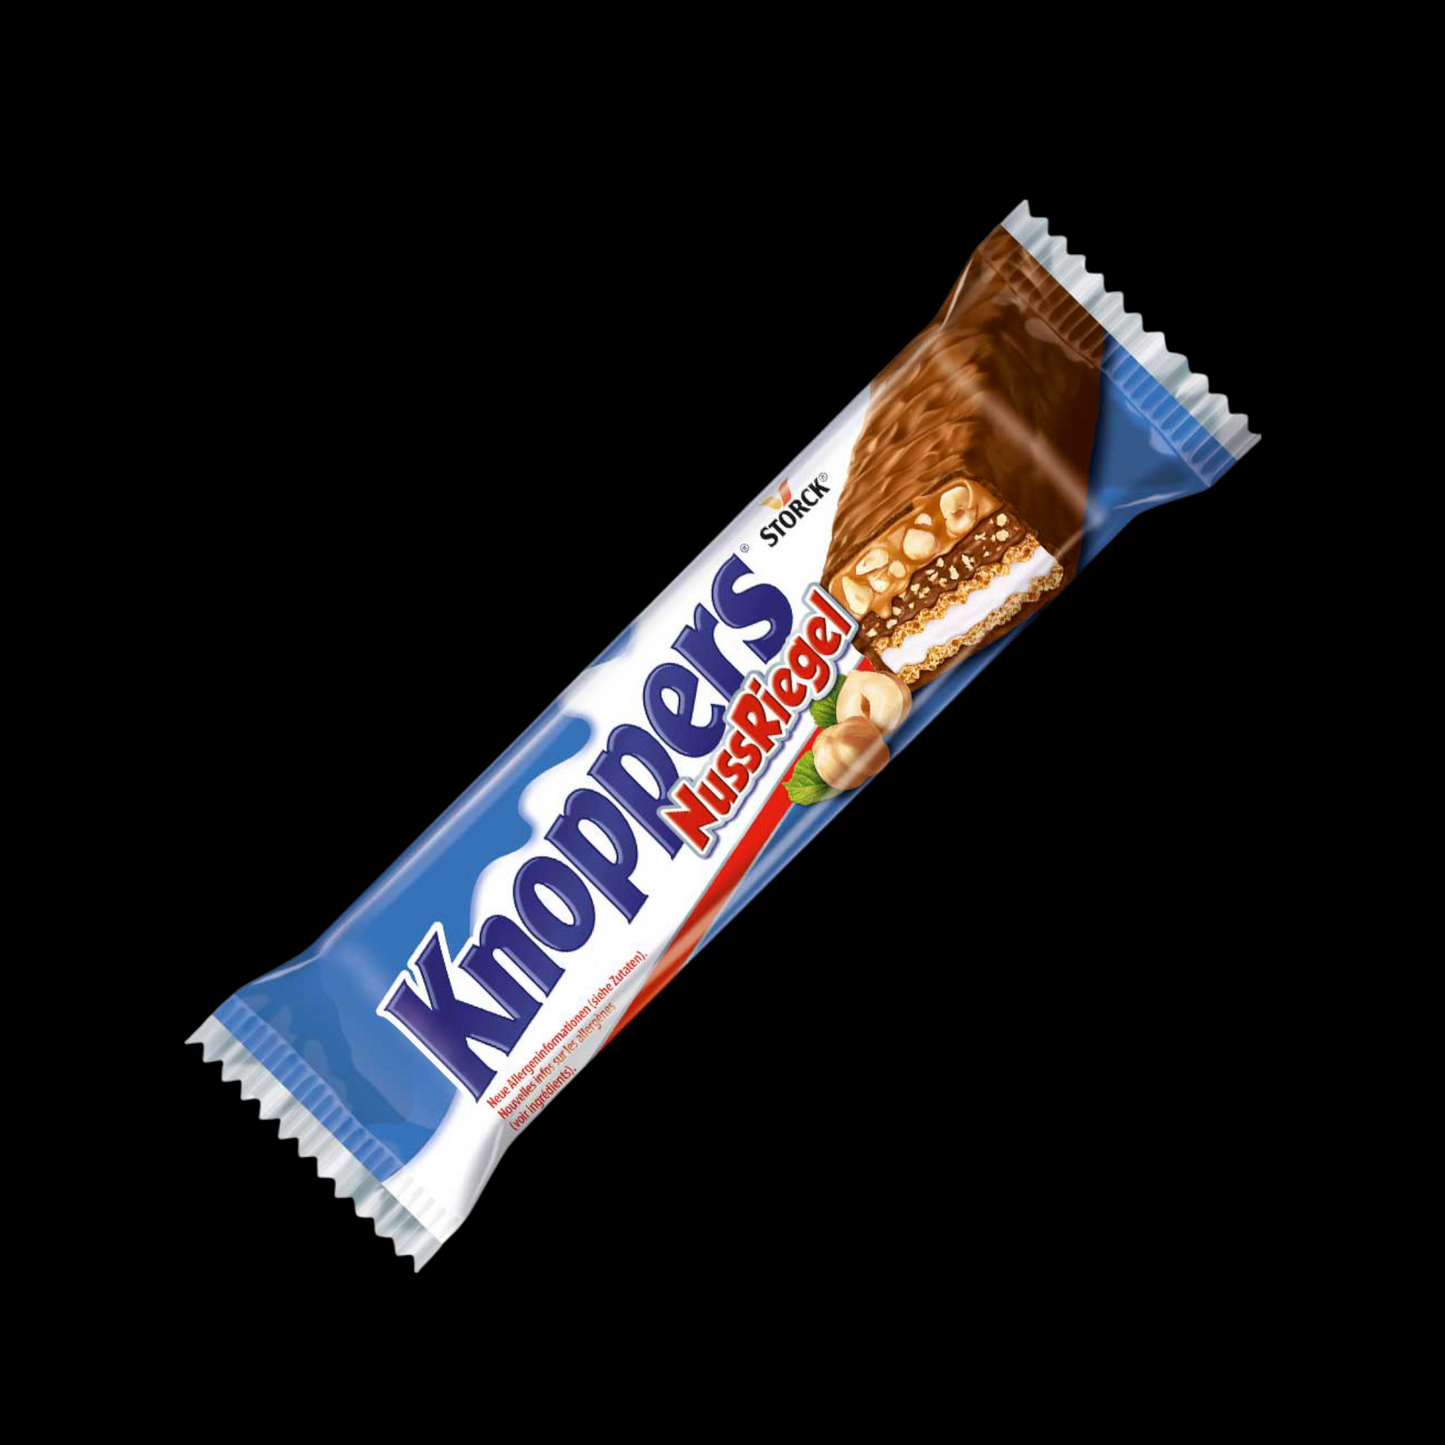 Knoppers NussRiegel 40g